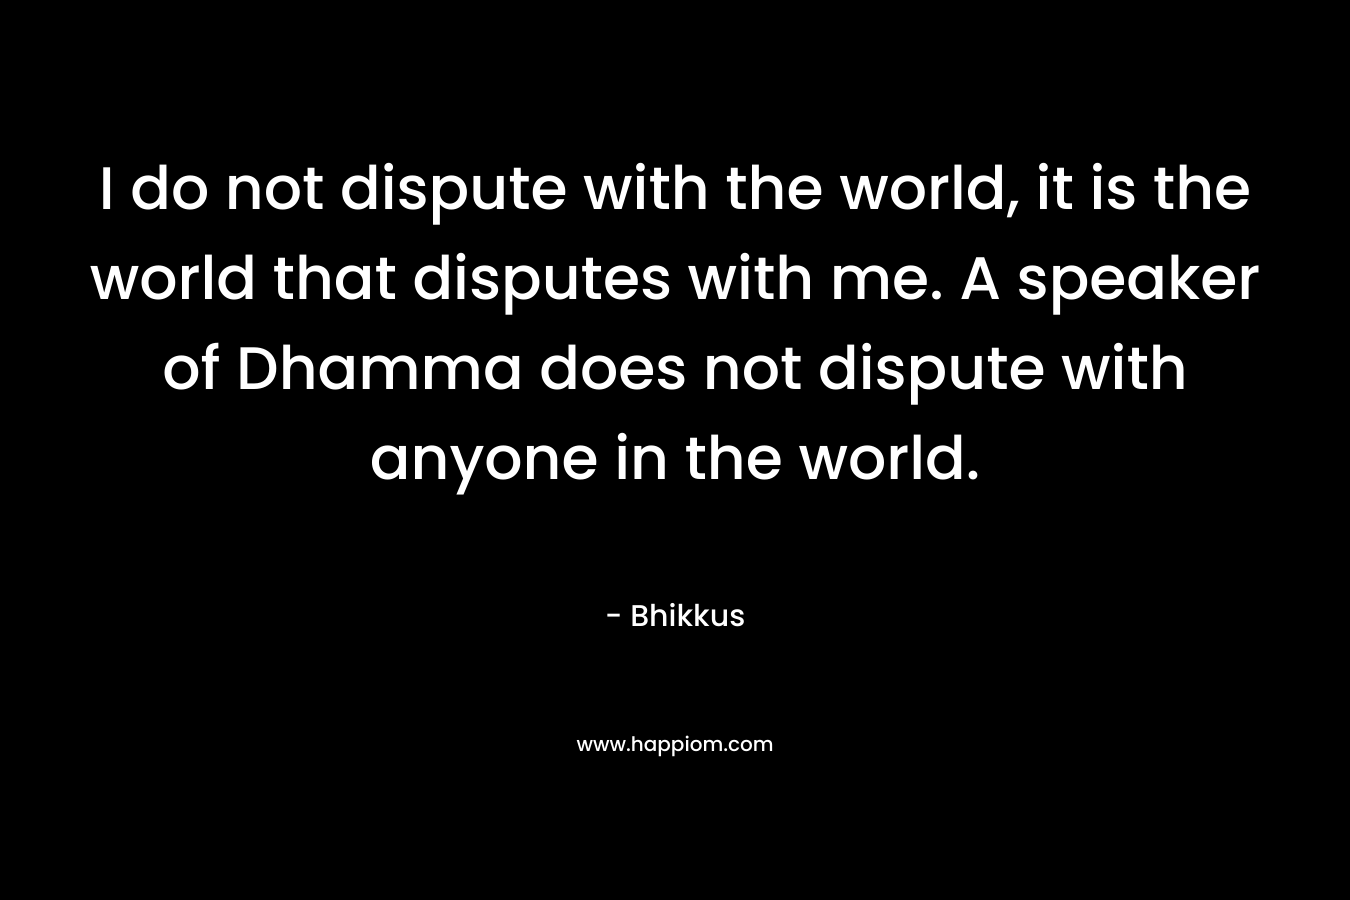 I do not dispute with the world, it is the world that disputes with me. A speaker of Dhamma does not dispute with anyone in the world. – Bhikkus